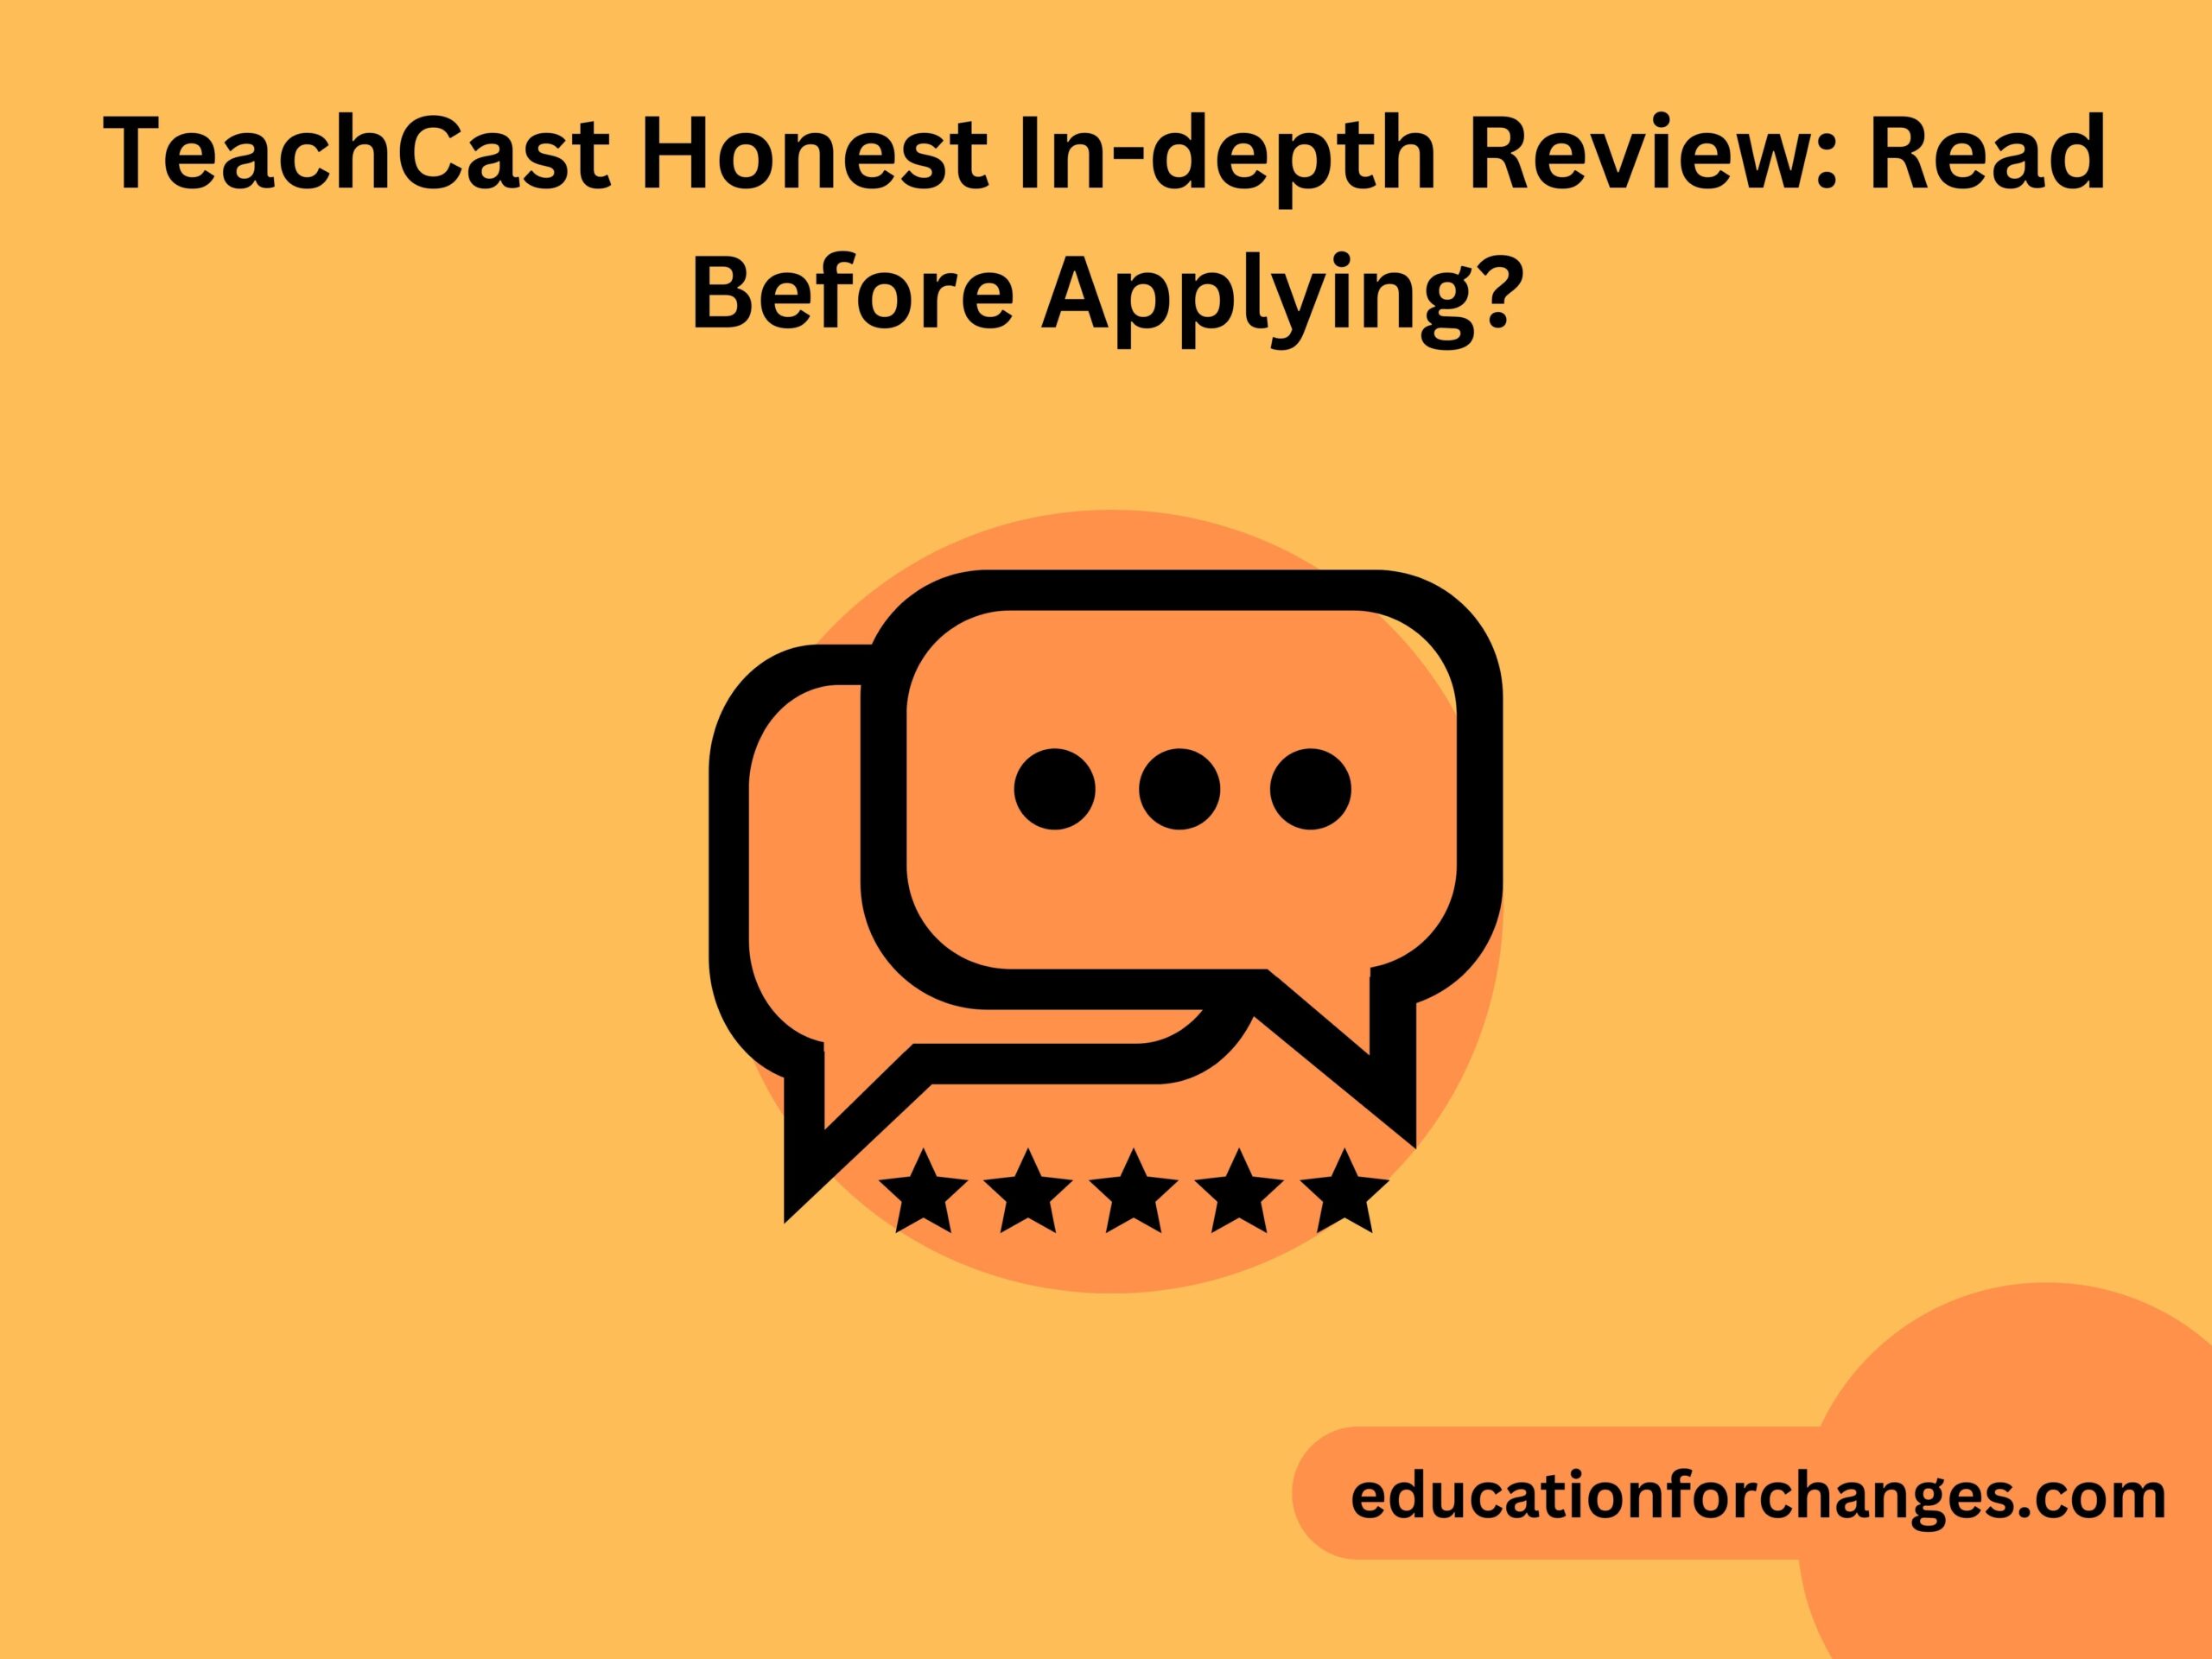 TeachCast Honest In-depth Review Read Before Applying